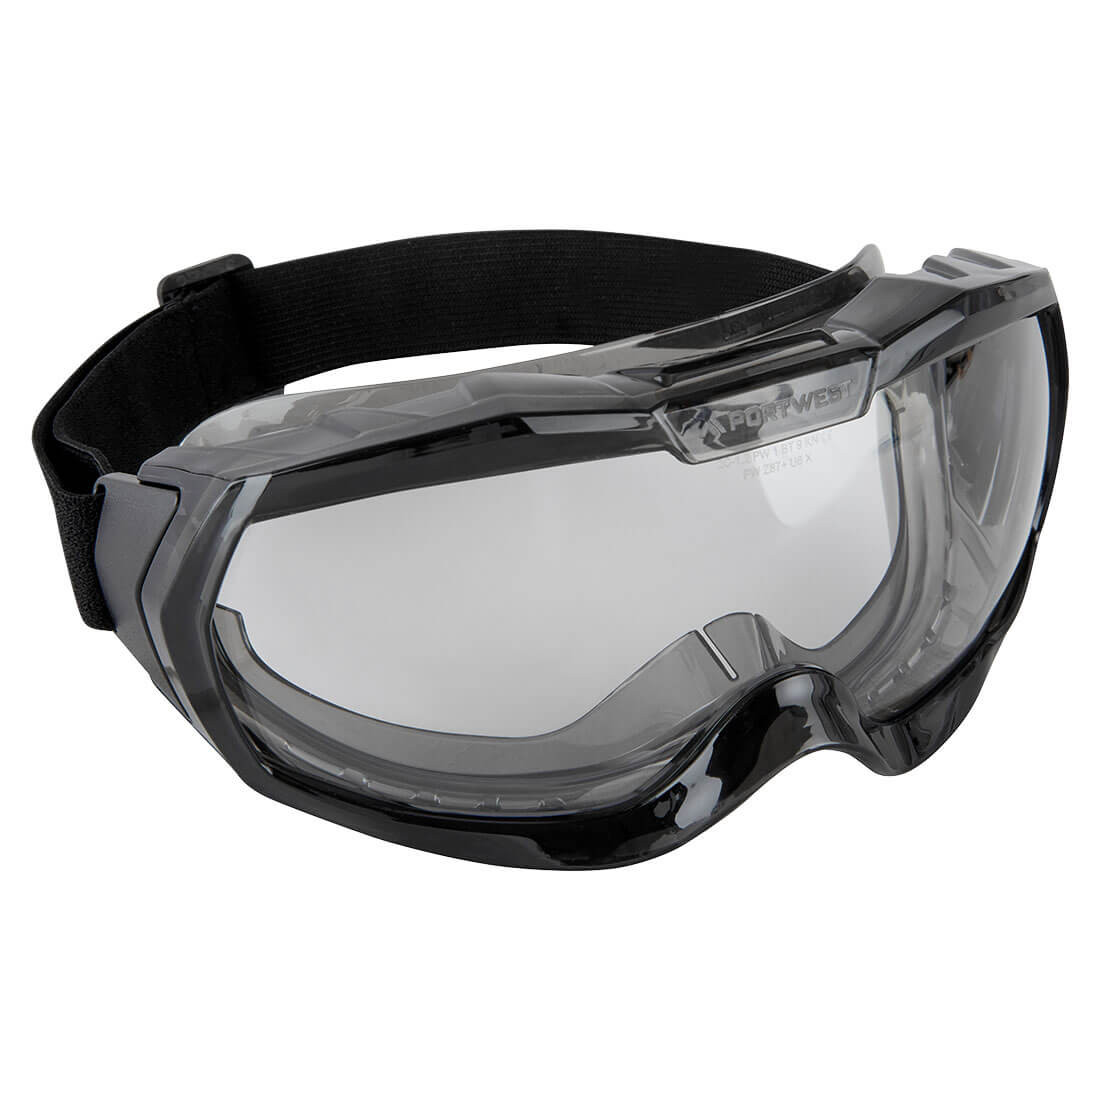 Ultra Safe Light Vented Goggles - Personal protection